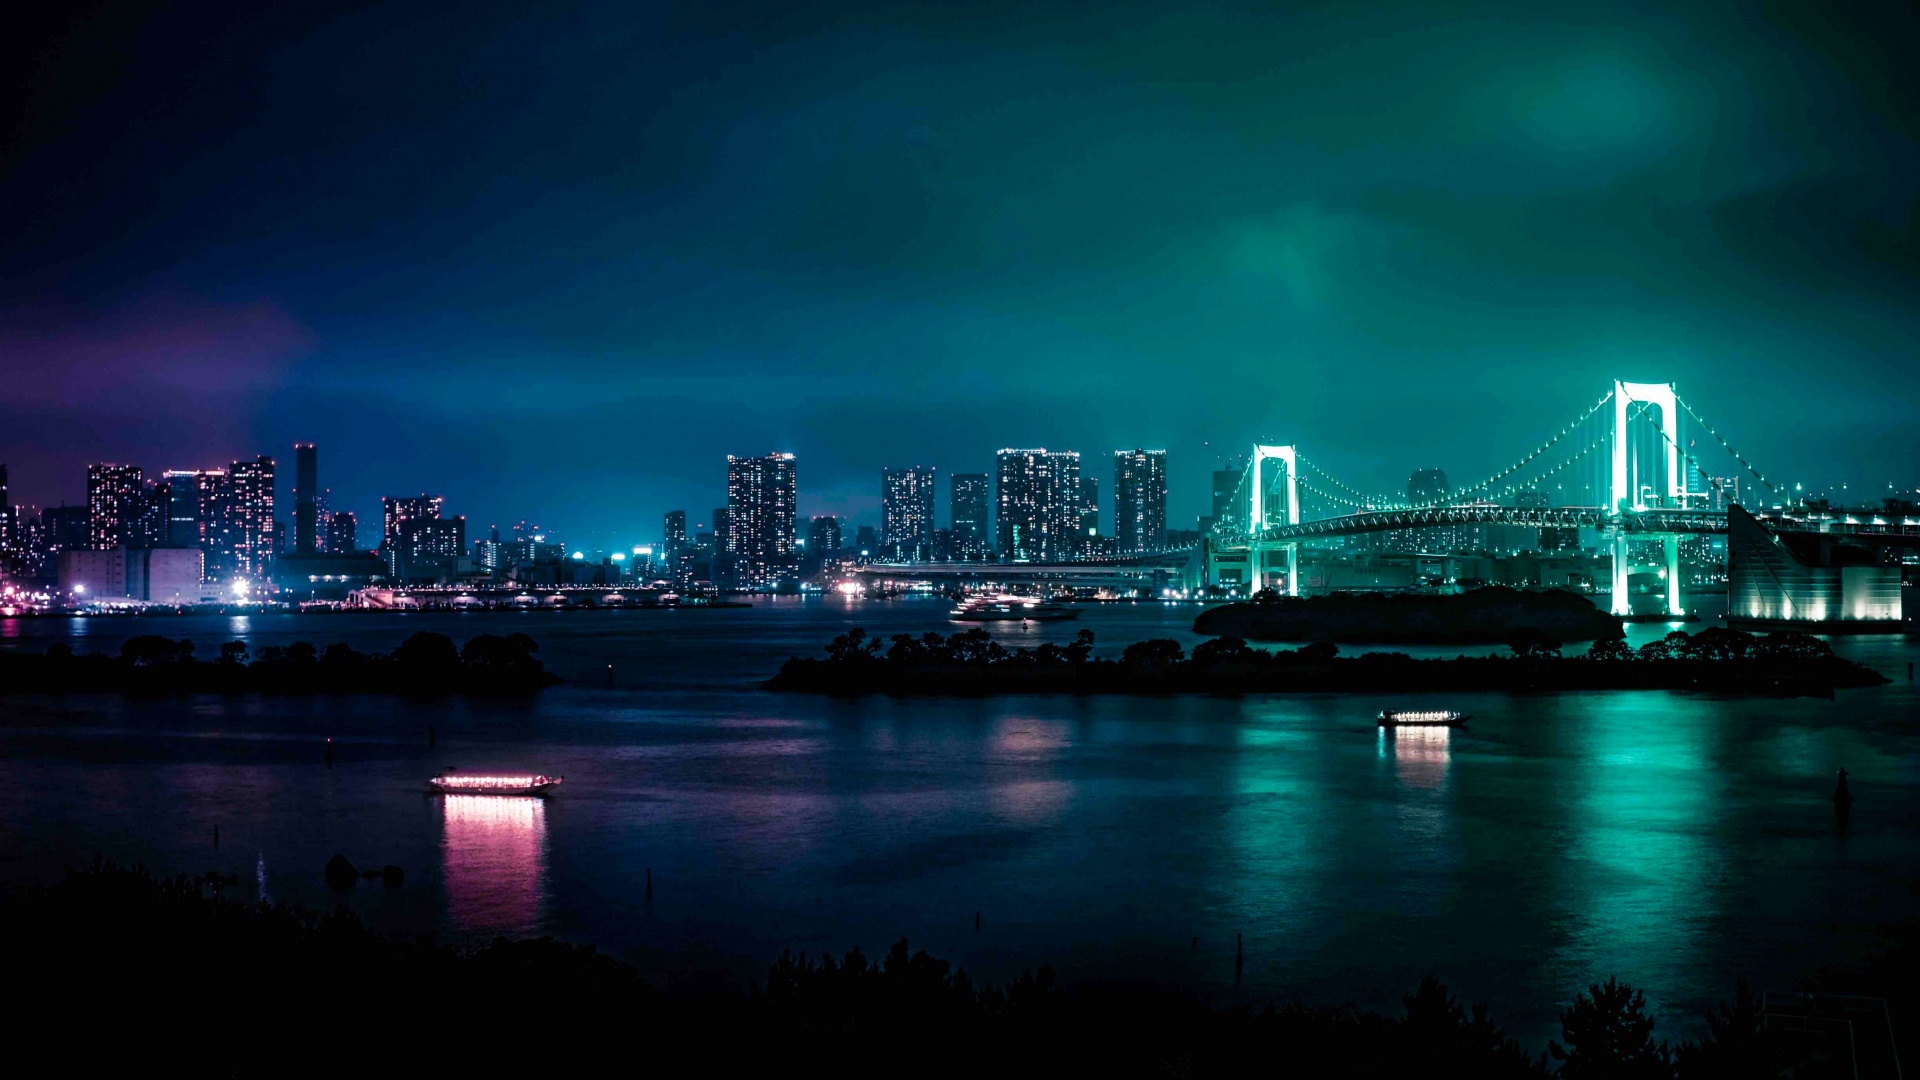 Bridge Over Water Near City Skyline During Night Time. Wallpaper in 1920x1080 Resolution